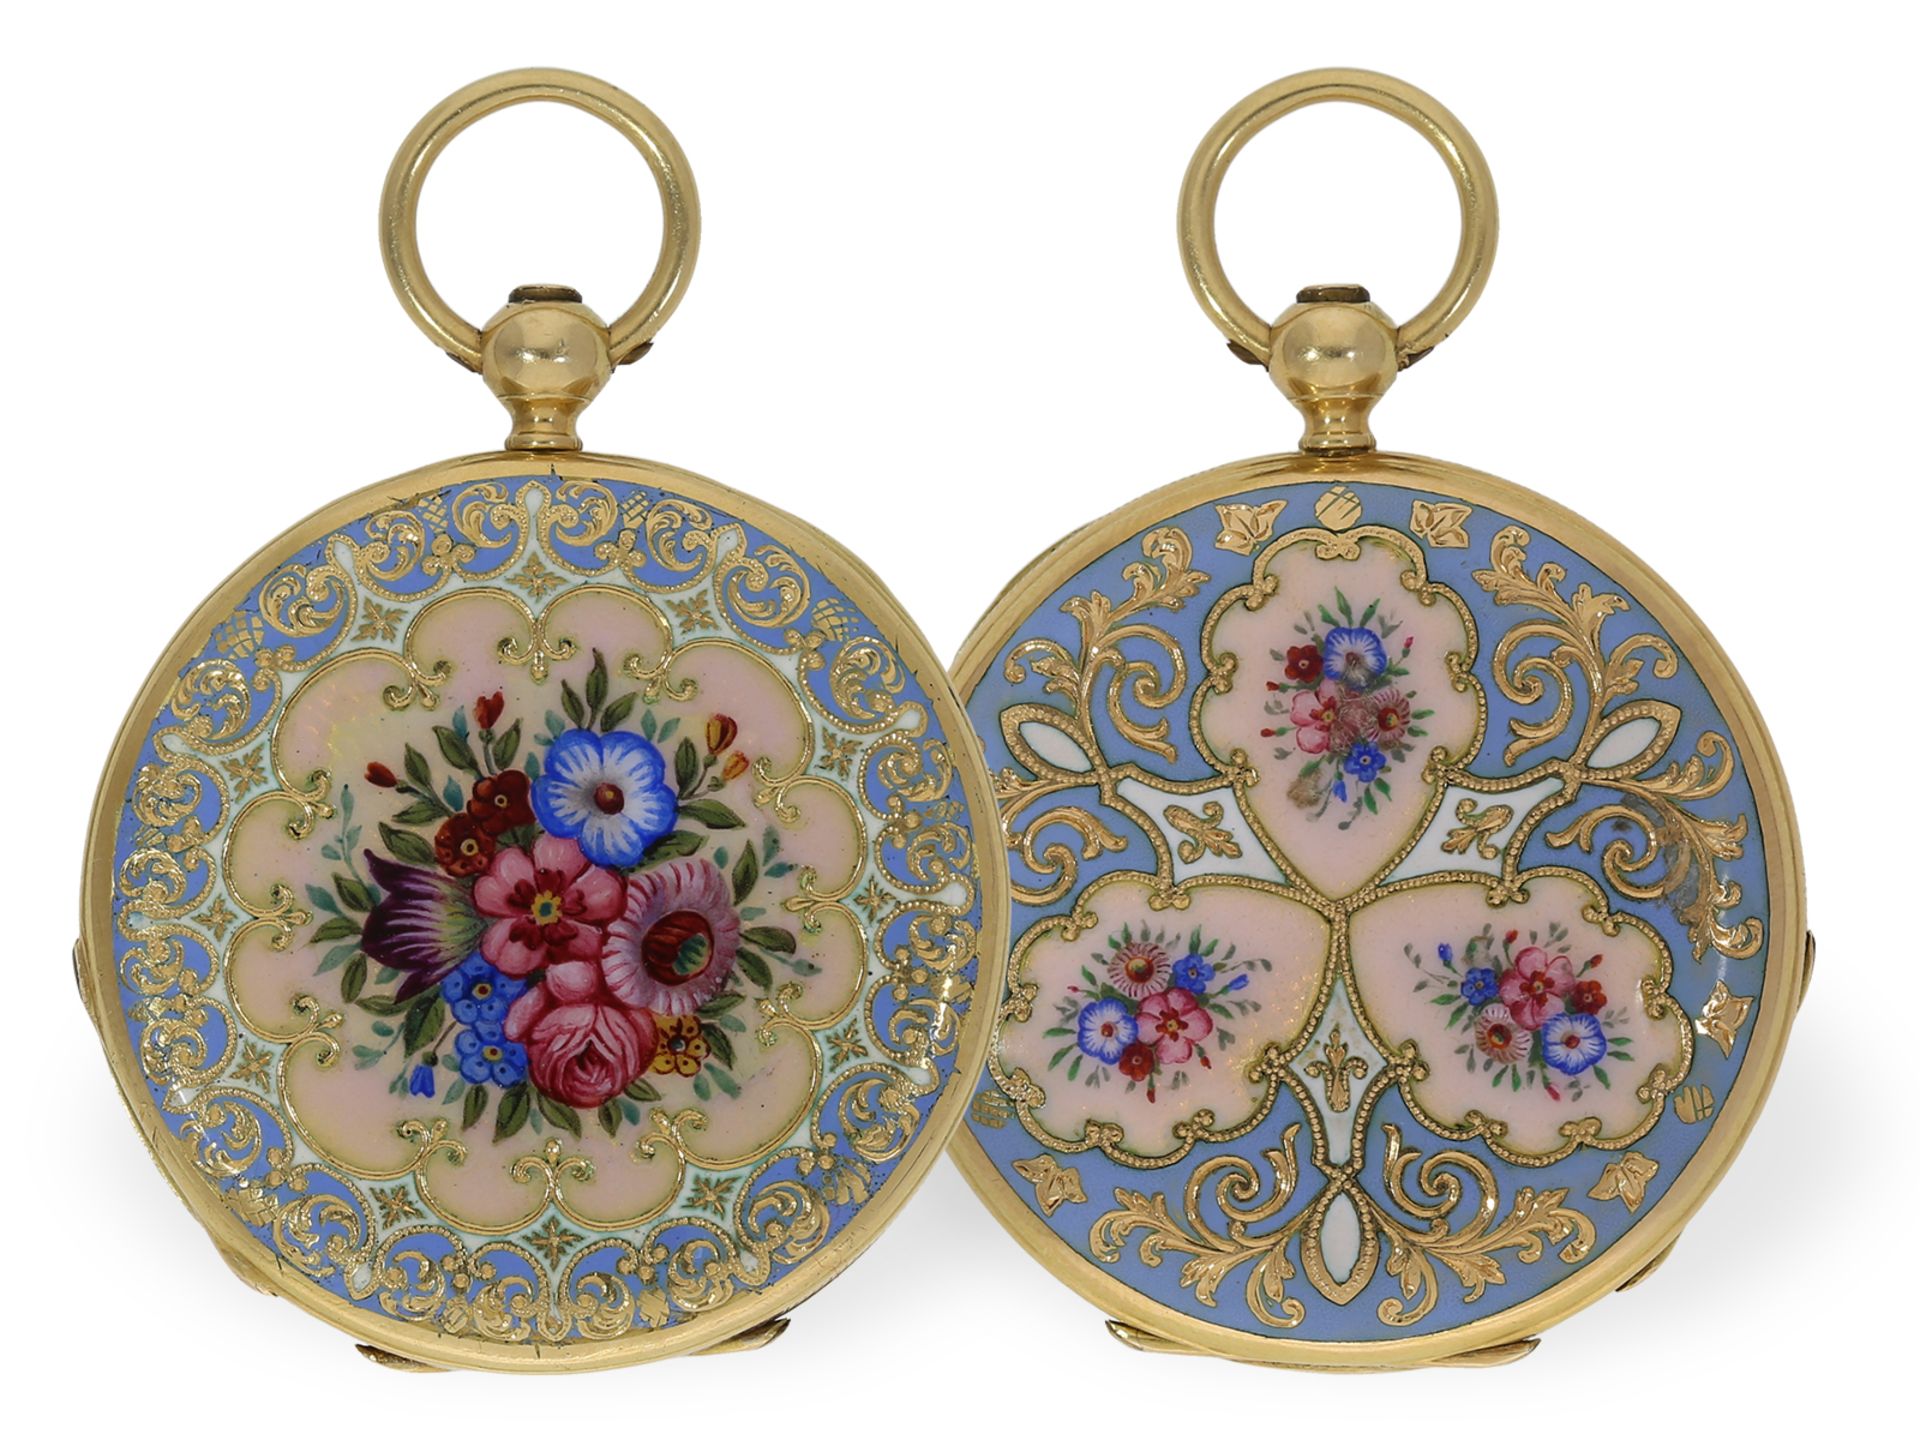 Pocket watch: top-quality gold/enamel hunting case watch, Henry Capt Geneve, ca. 1830